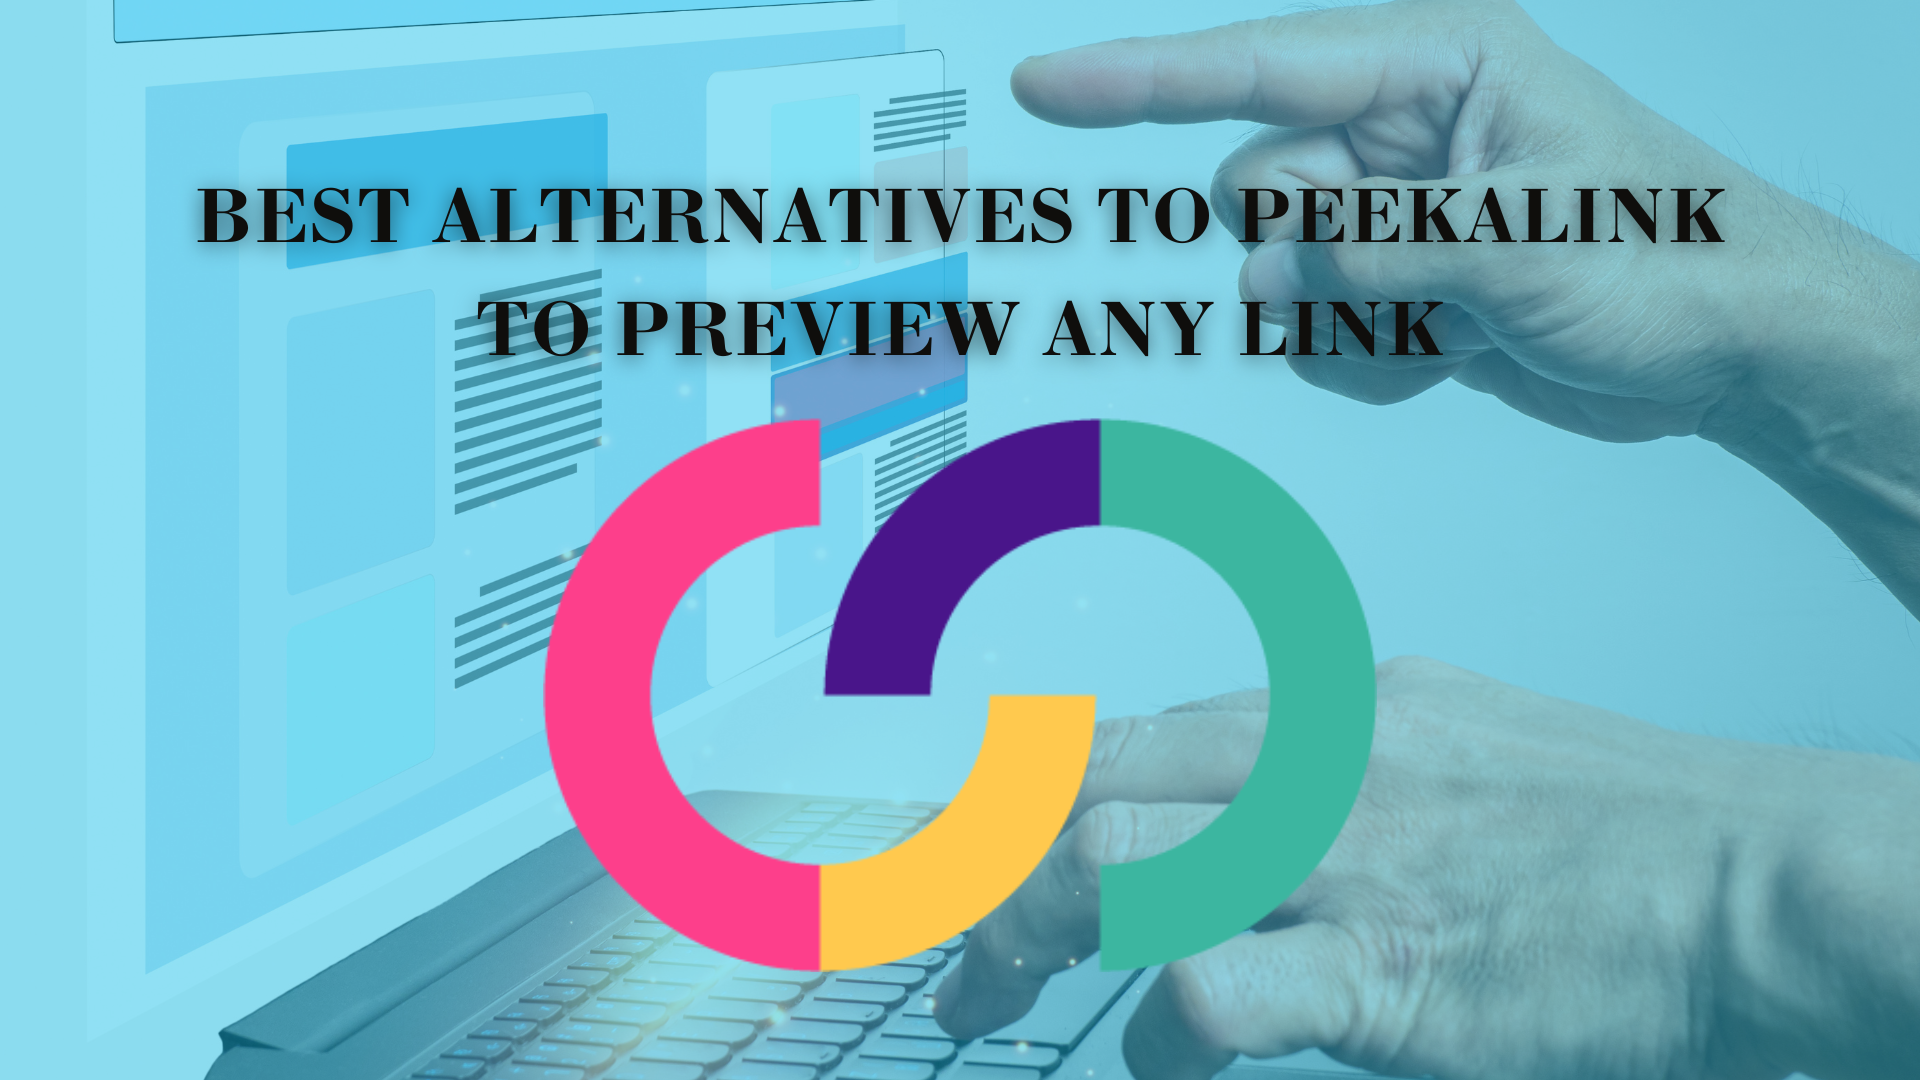 ✨Introducing Peekalink, an API to magically preview any link., by  lifenautjoe